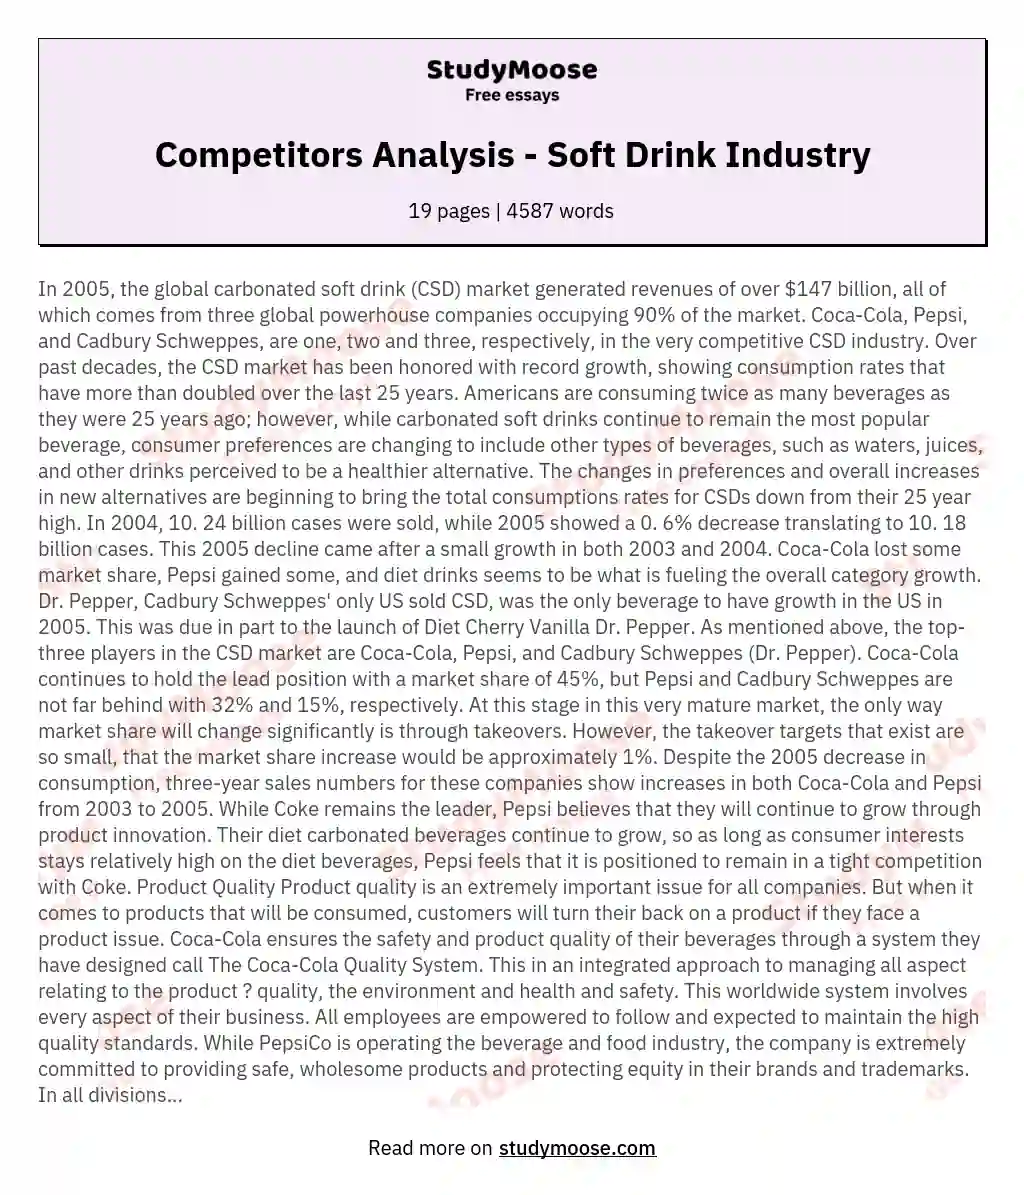 Competitors Analysis - Soft Drink Industry essay